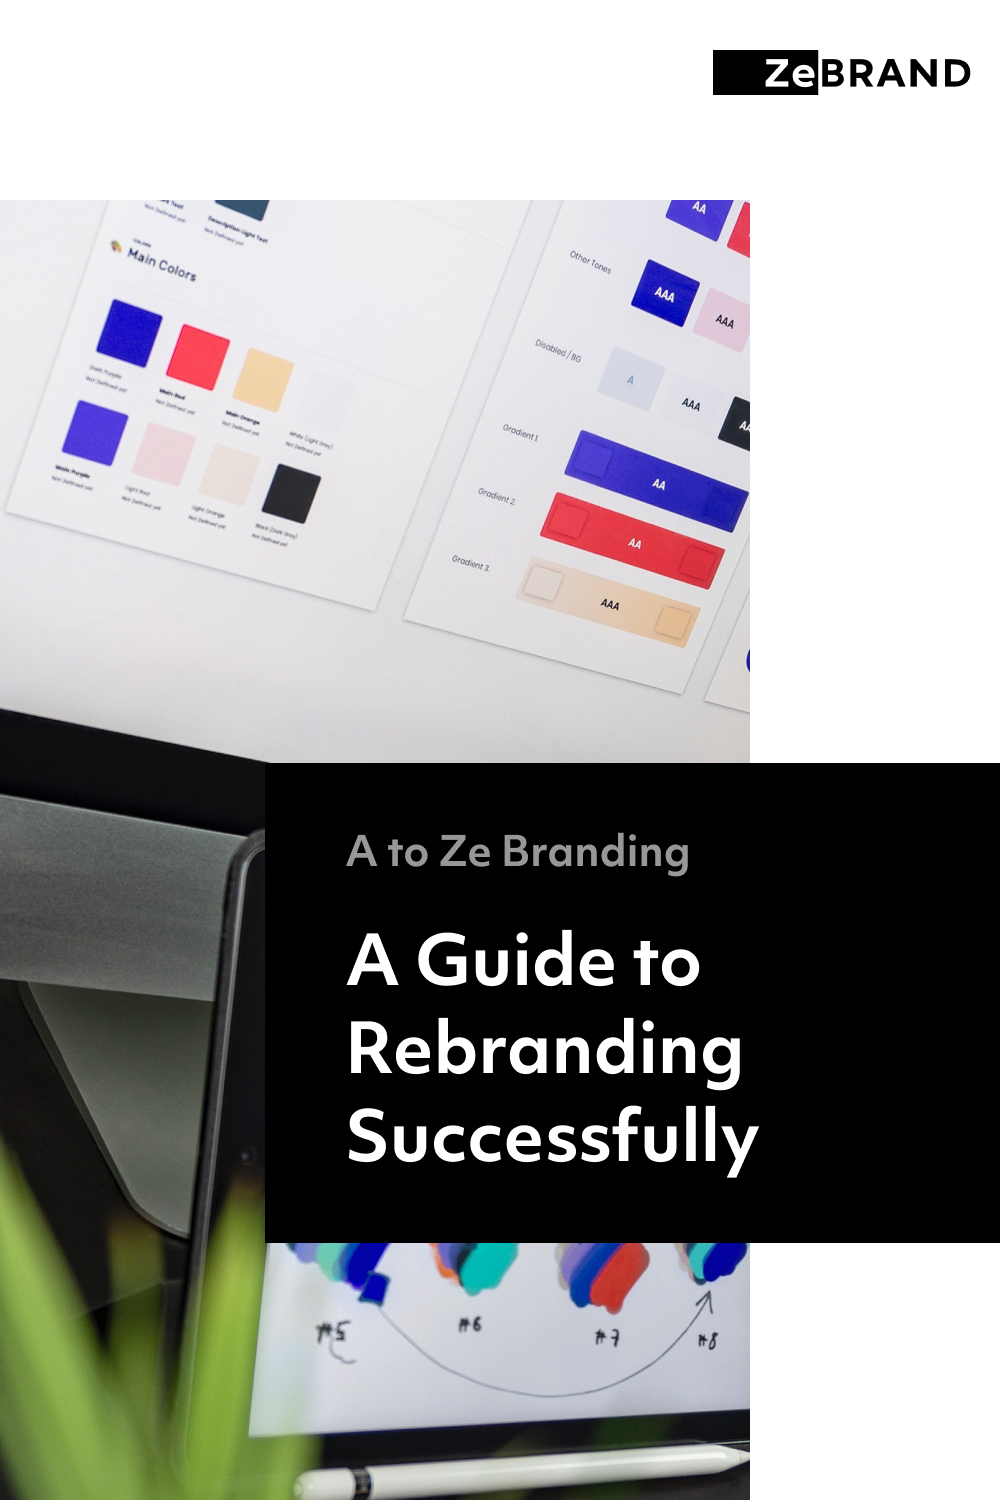 A Guide to Rebranding Successfully